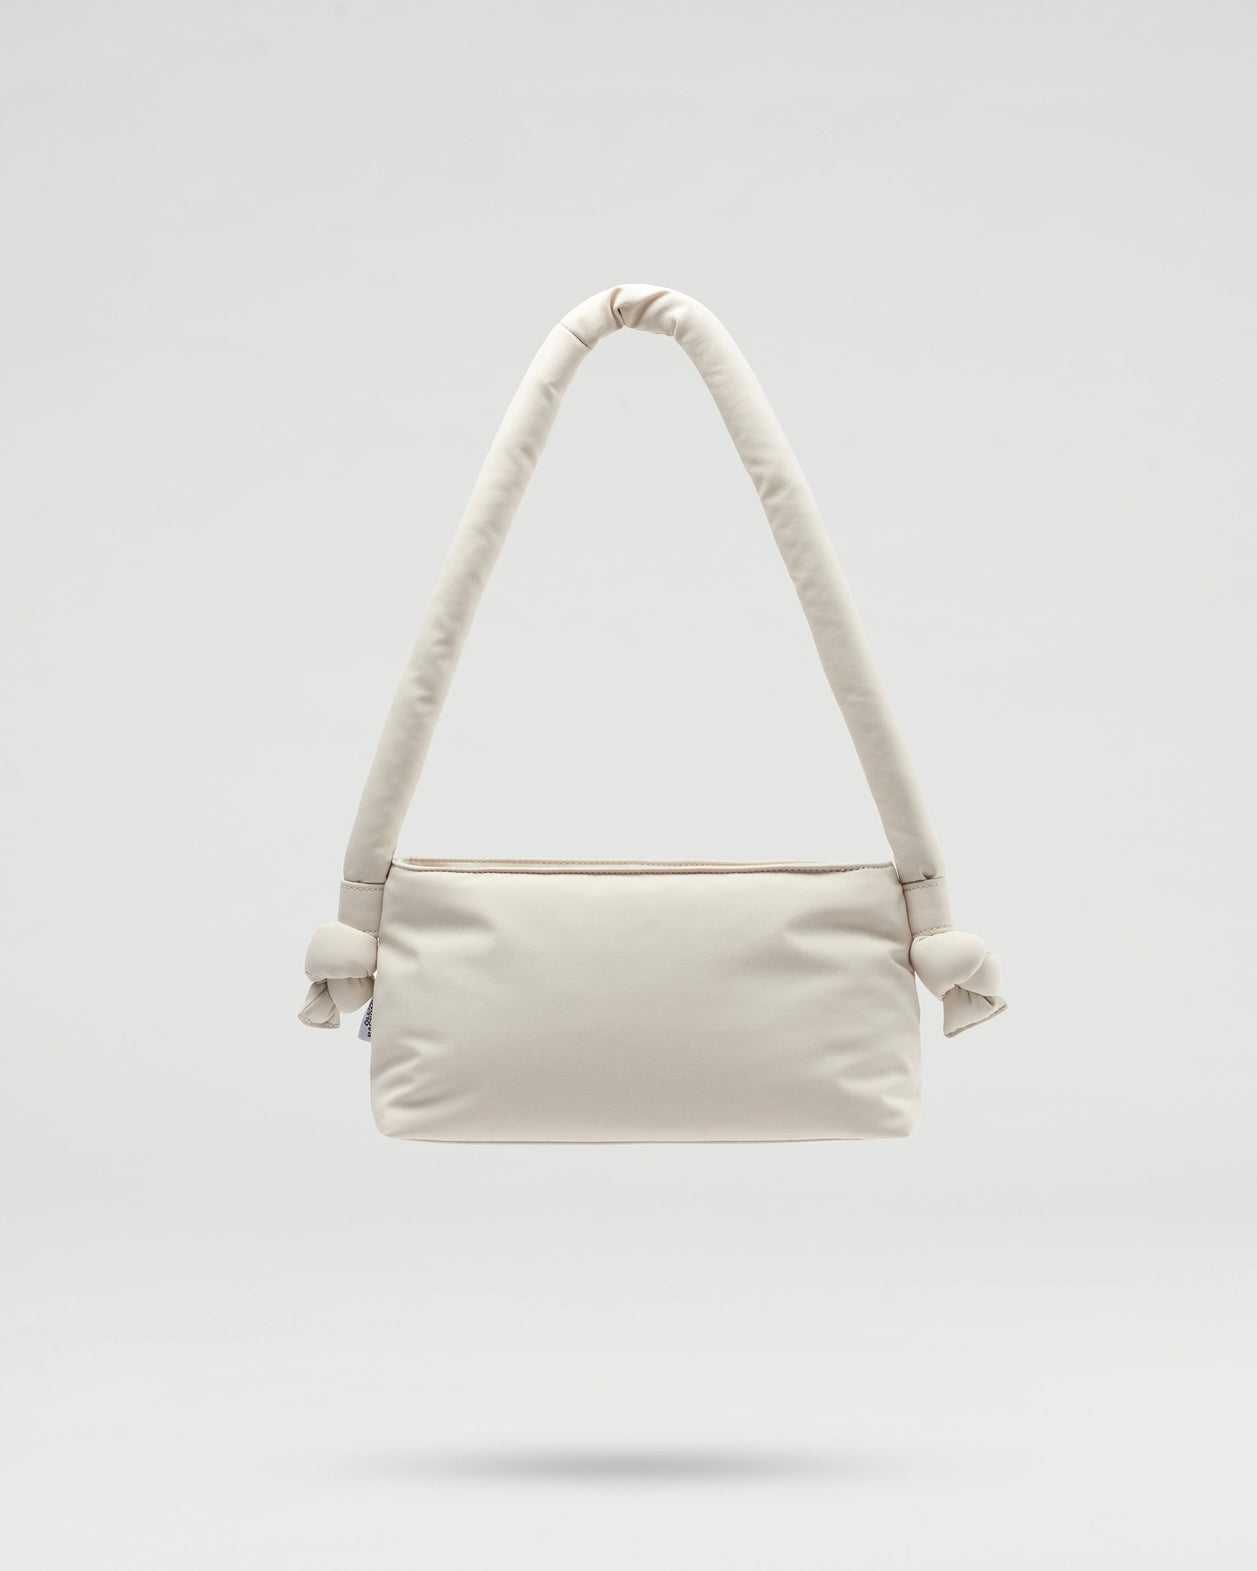 the Ölend Taco Bag in sand floating against a neutral background